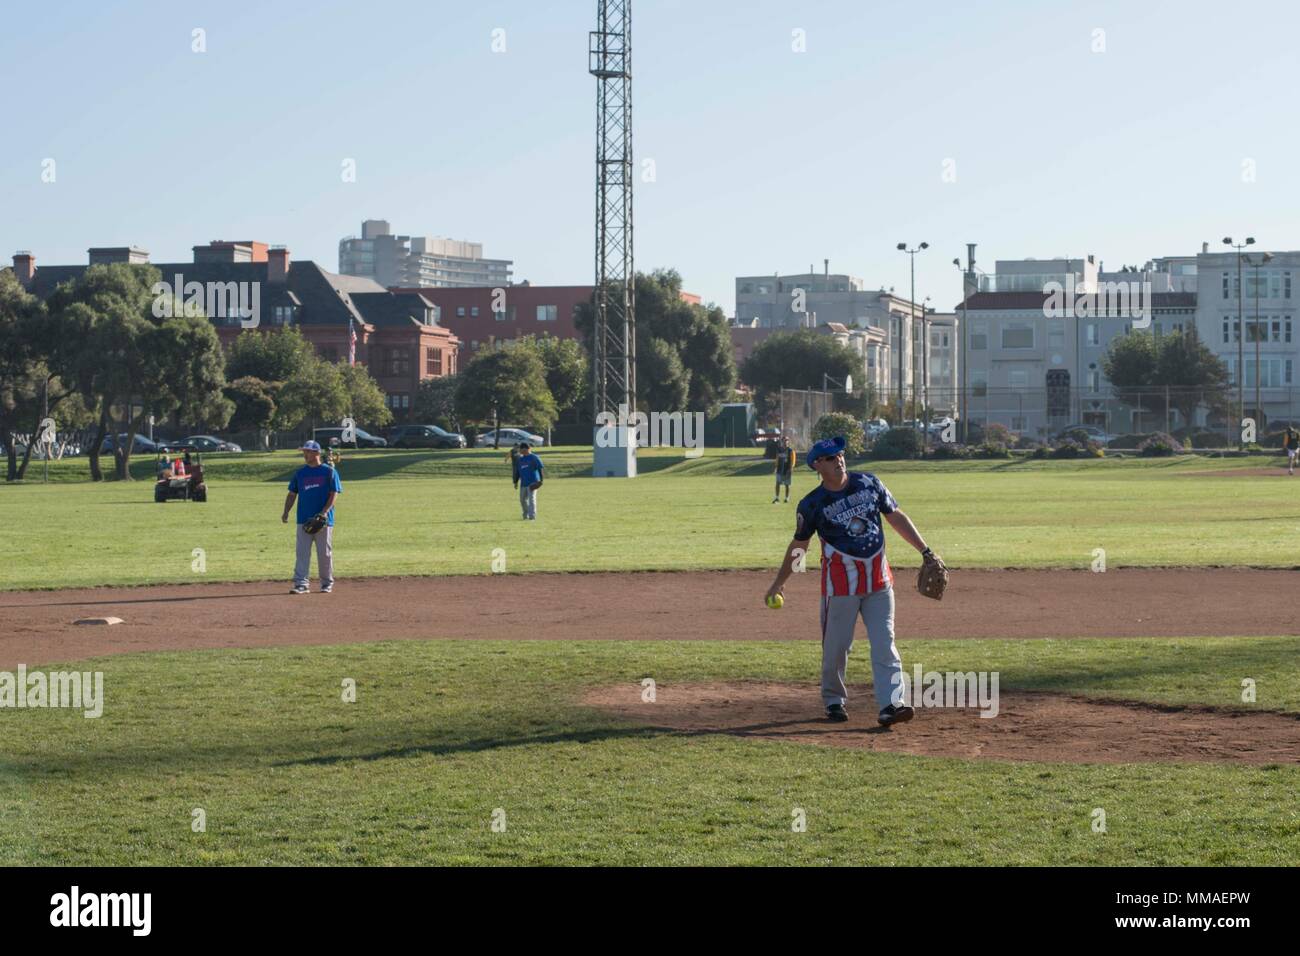 SAN FRANCISCO (Oct. 5, 2017) U.S. Coast Guard personnel play against members of the Oakland Police Department at a softball tournament during Fleet Week San Francisco.  Fleet week provides an opportunity for the American public to meet their Navy, Marine Corps, and Coast Guard team and to experience America's sea services, highlighting naval personnel, equipment, technology, and capabilities, with an emphasis on humanitarian assistance and disaster response.  (U.S. Navy photo by Mass Communication Specialist 2nd Class Chelsea Troy Milburn) Stock Photo